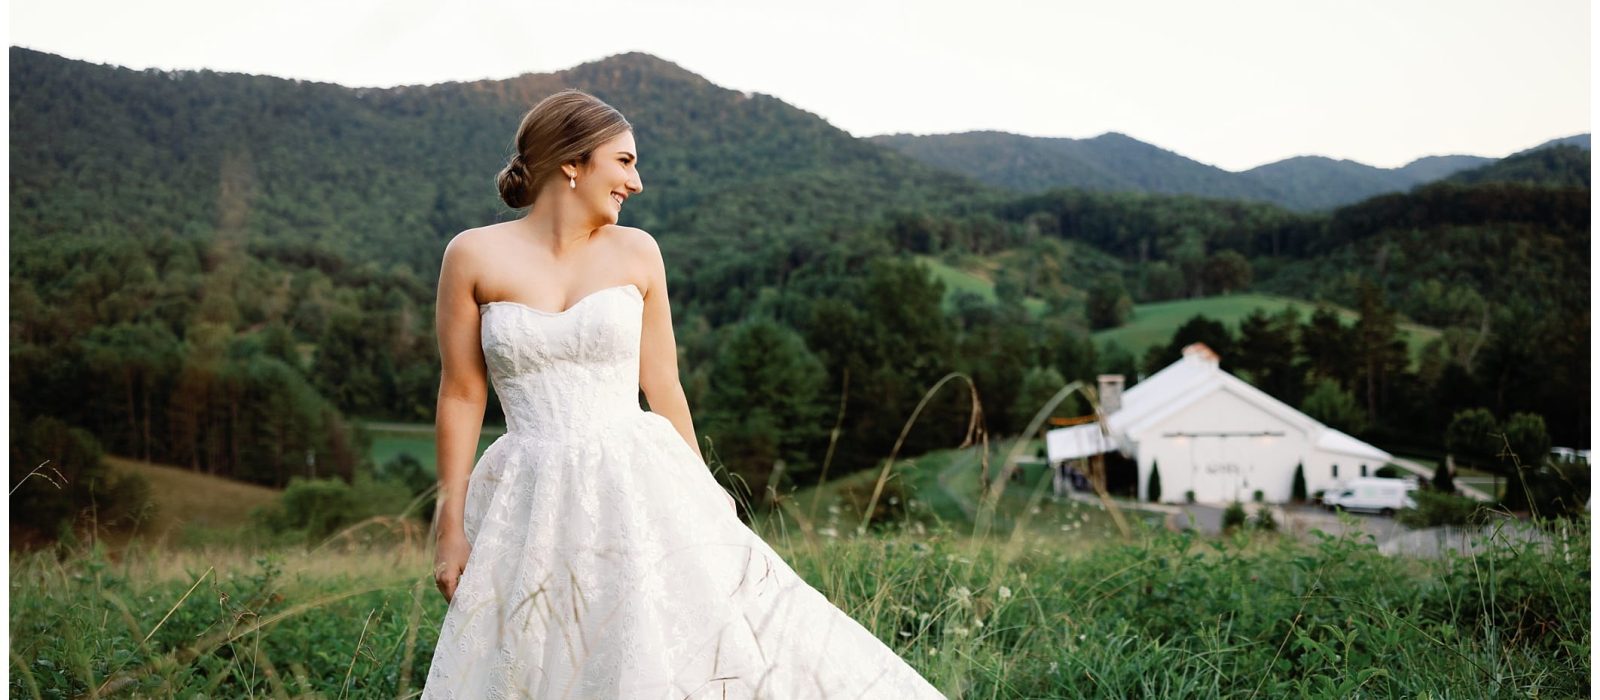 An elegant bride in a white wedding dress standing in a field with mountains as the backdrop for a summer wedding in Asheville.